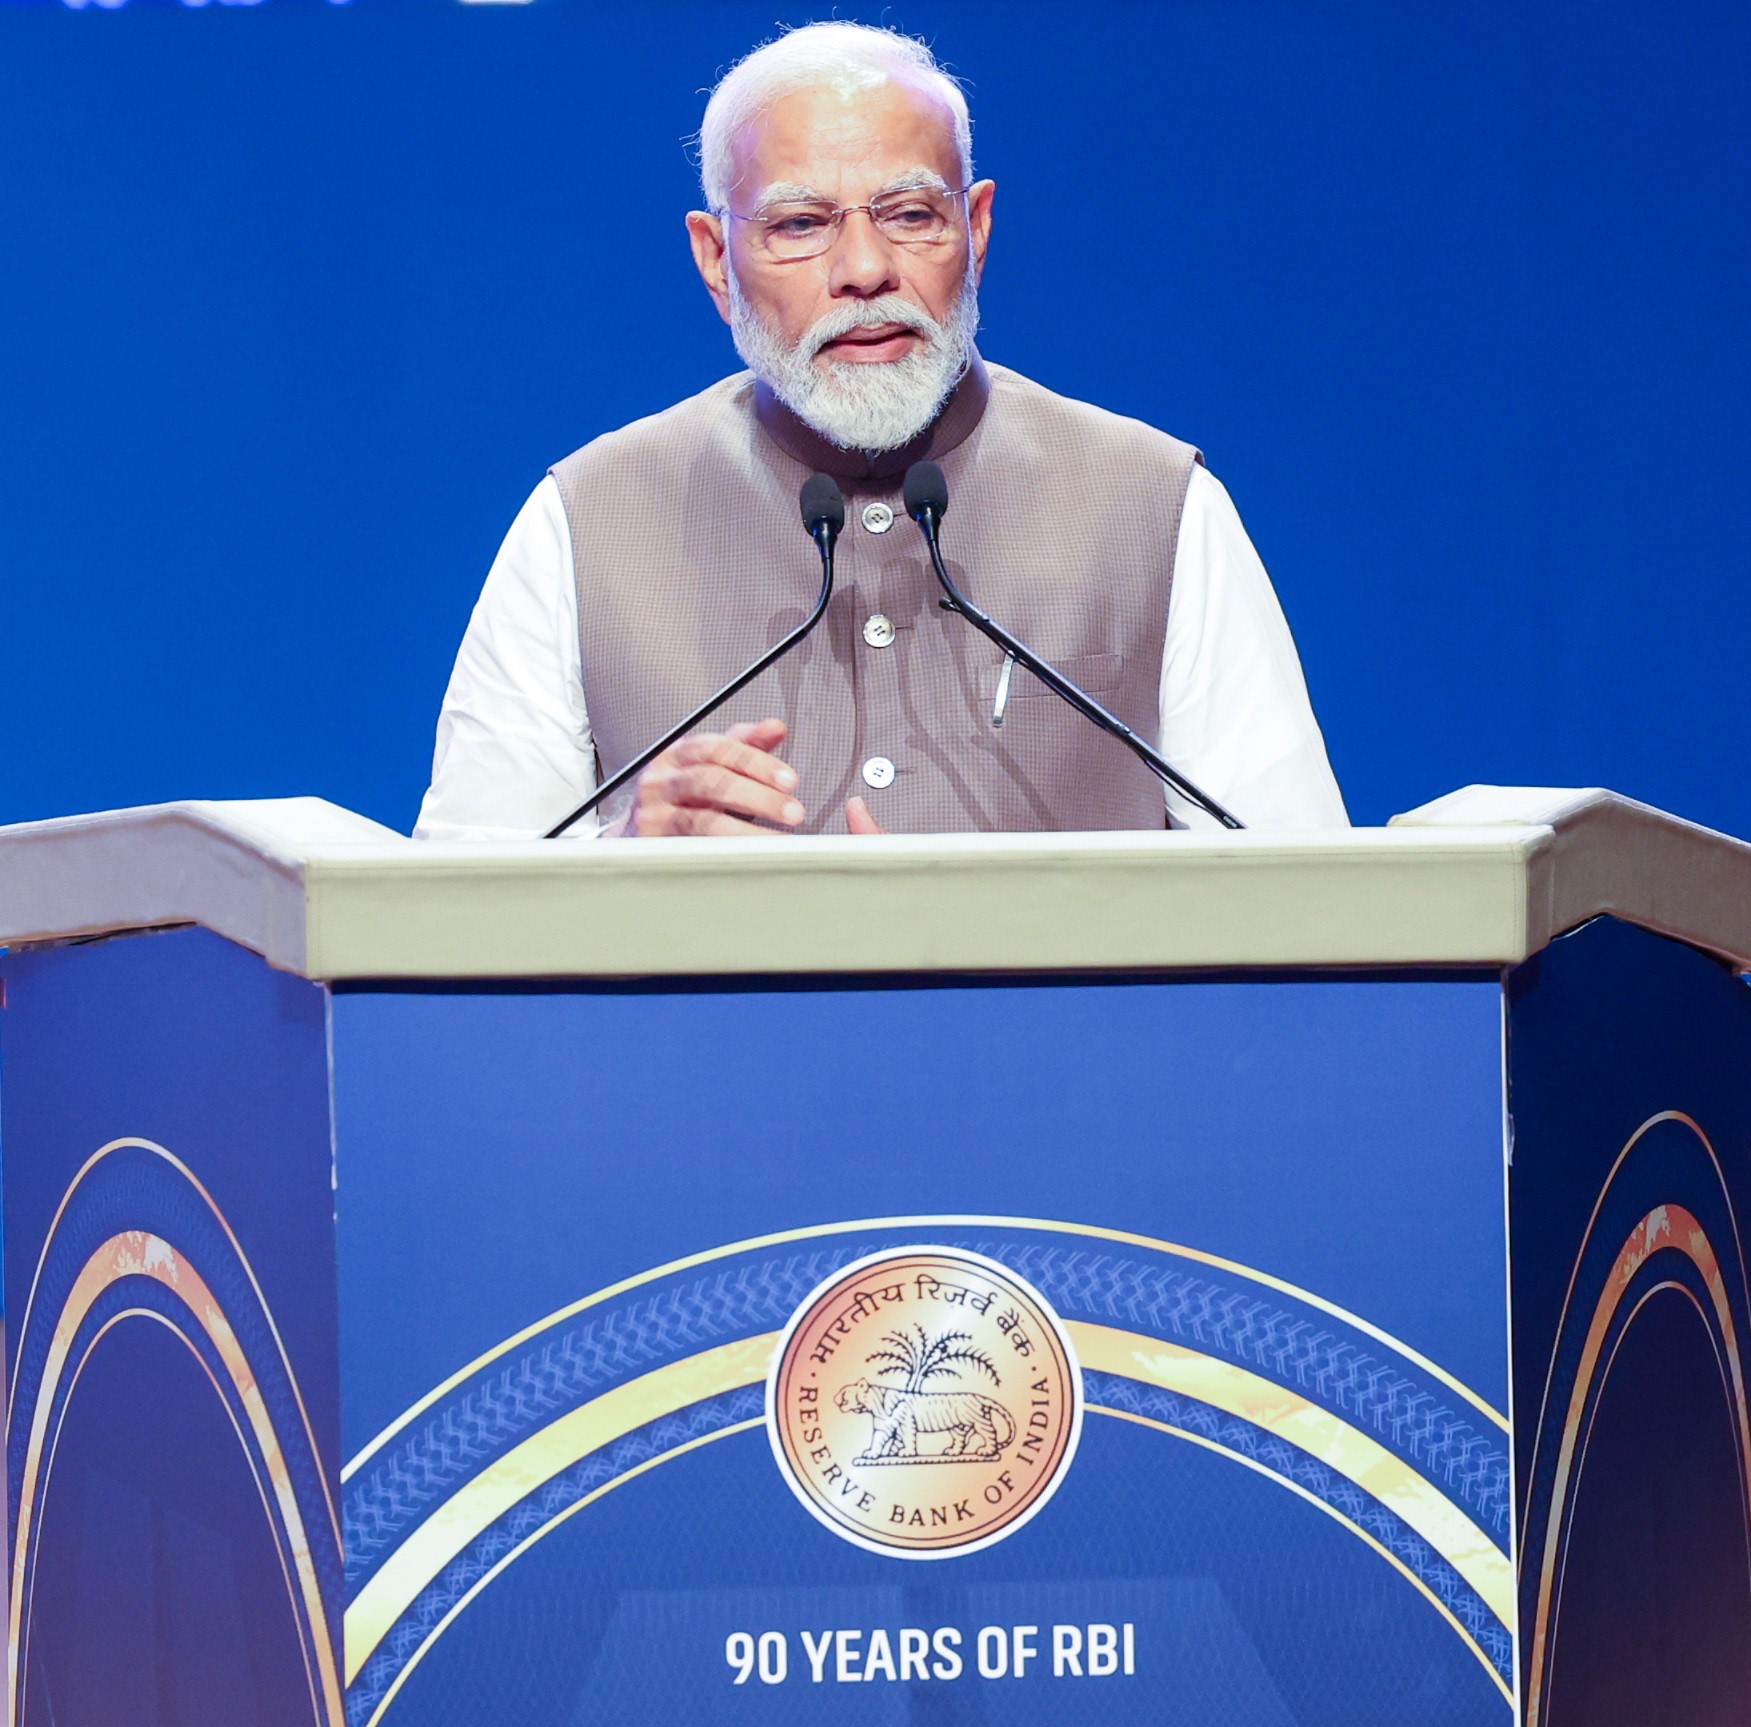 India is becoming the engine of global growth with 15 percent share in global GDP growth: PM Modi